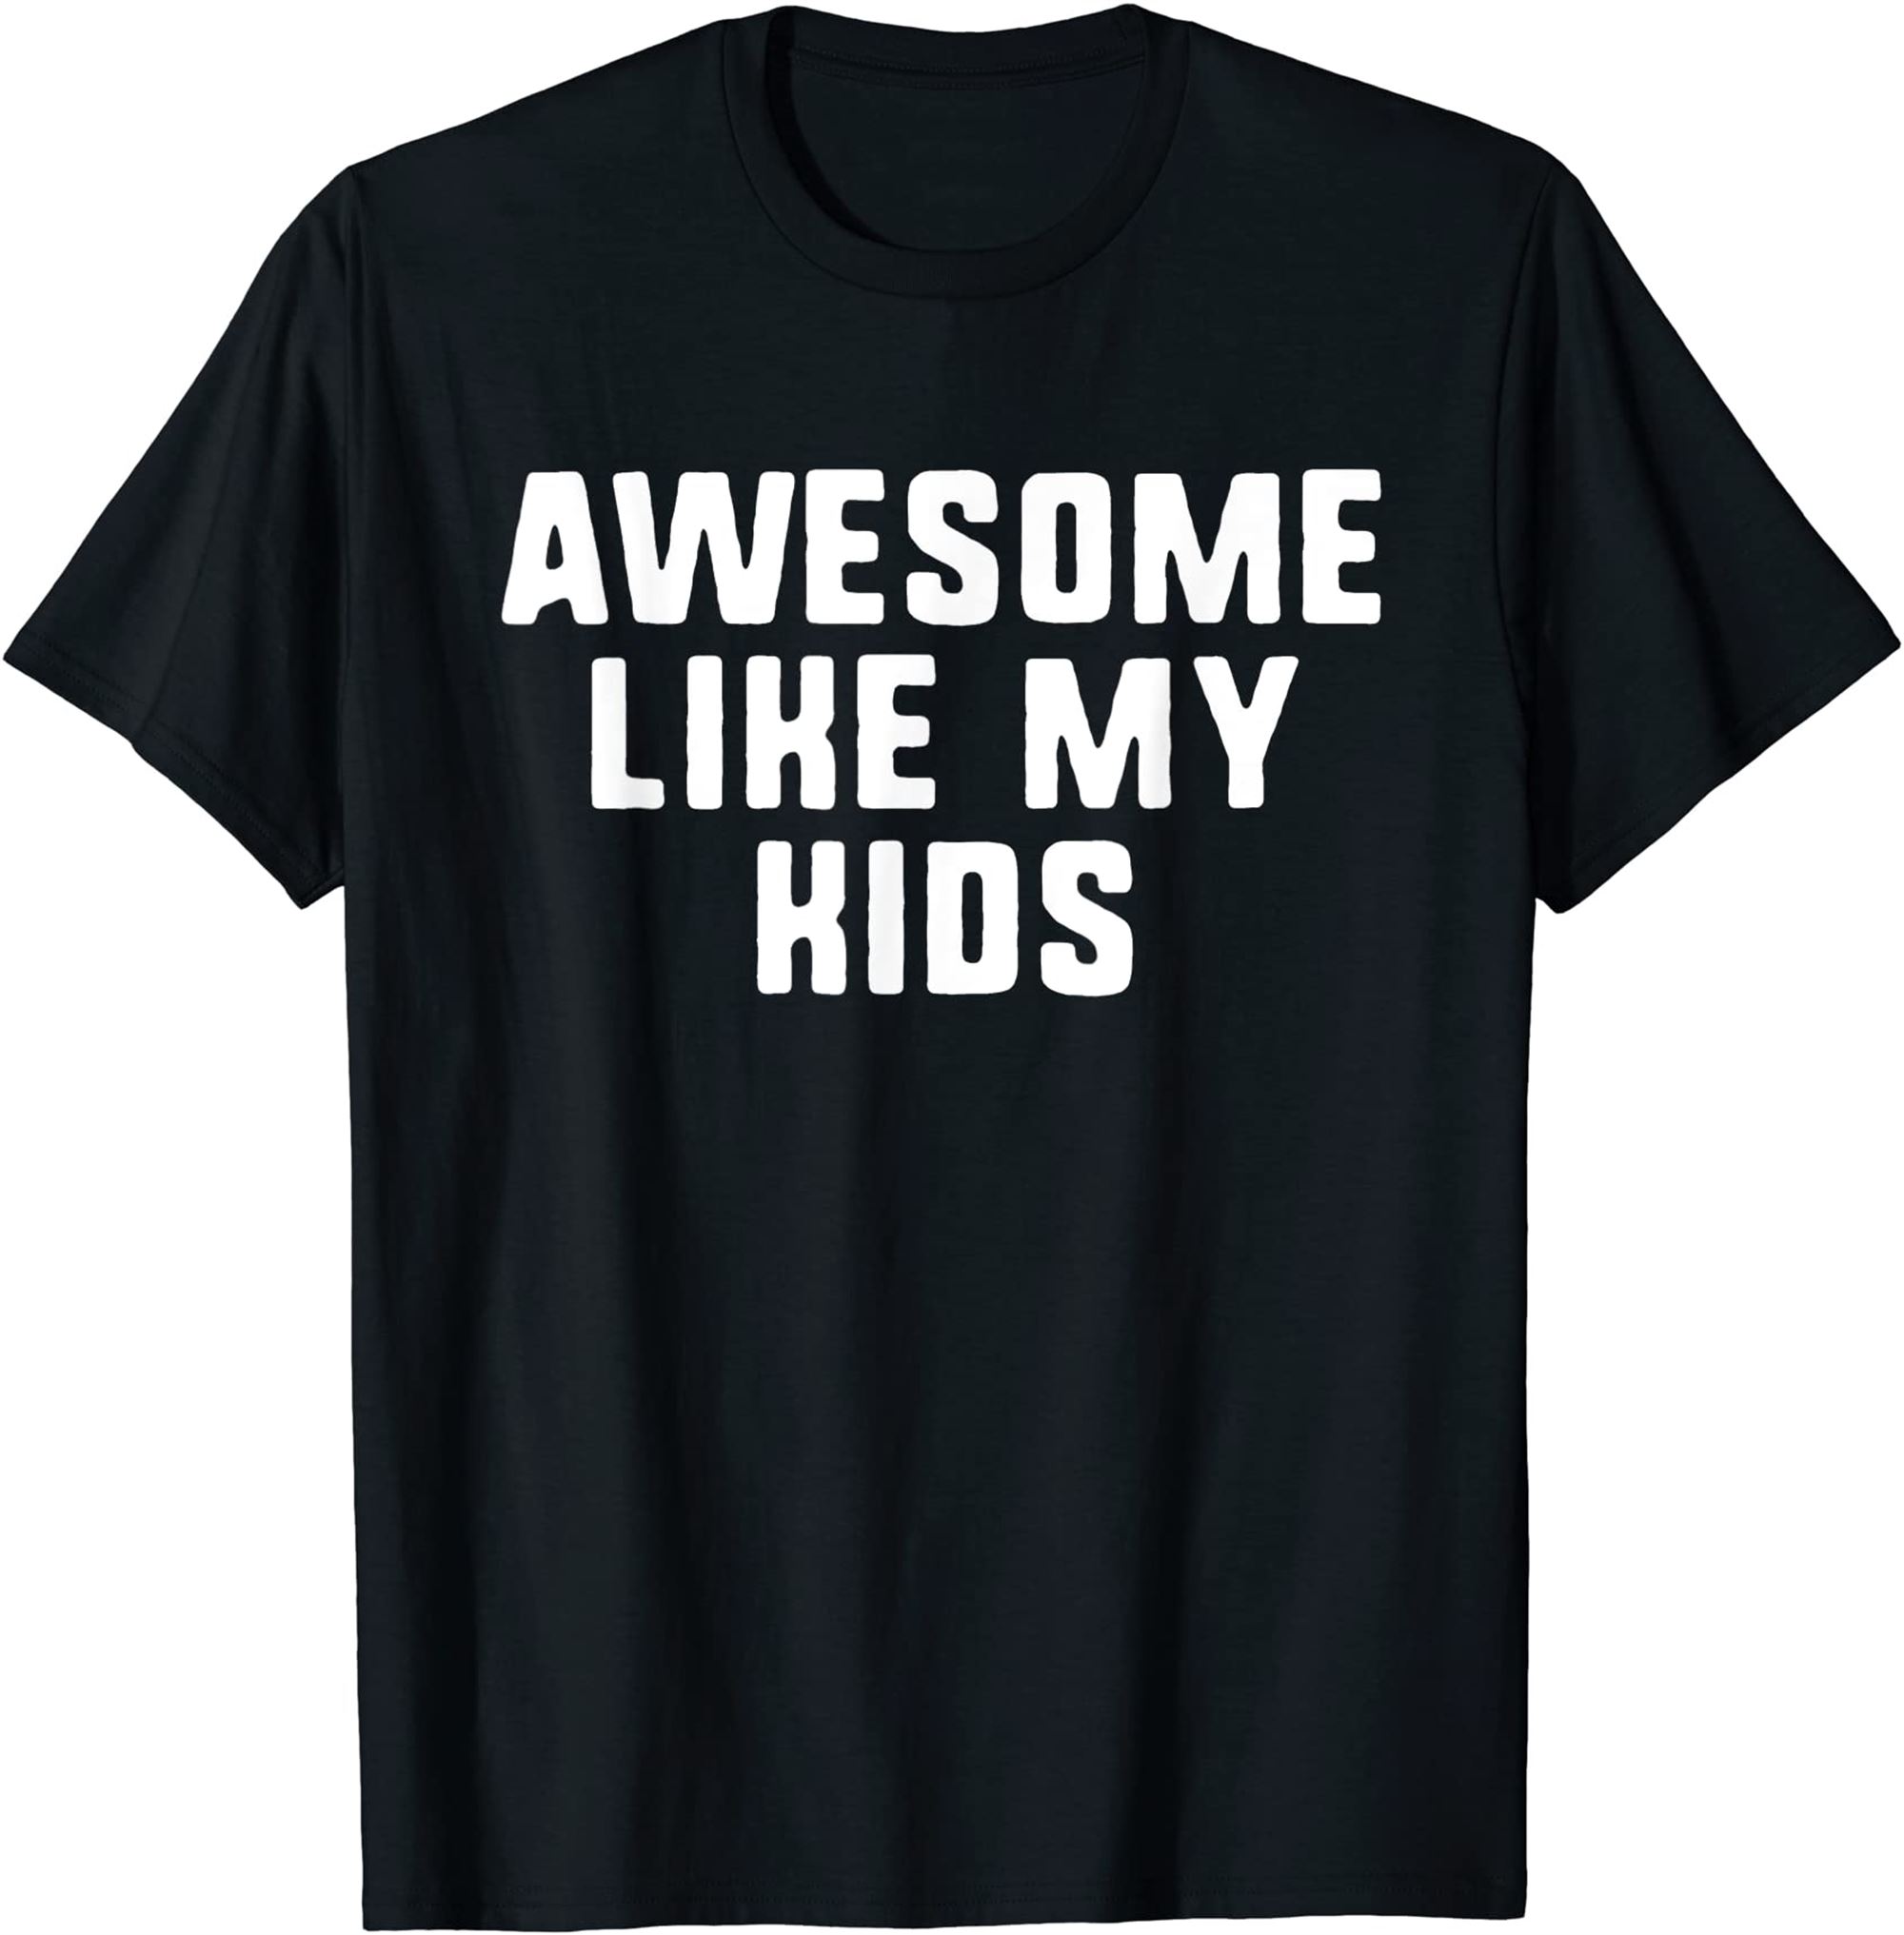 Awesome Like My Kids Mom Dad Funny Gift T-shirt Size Up To 5xl